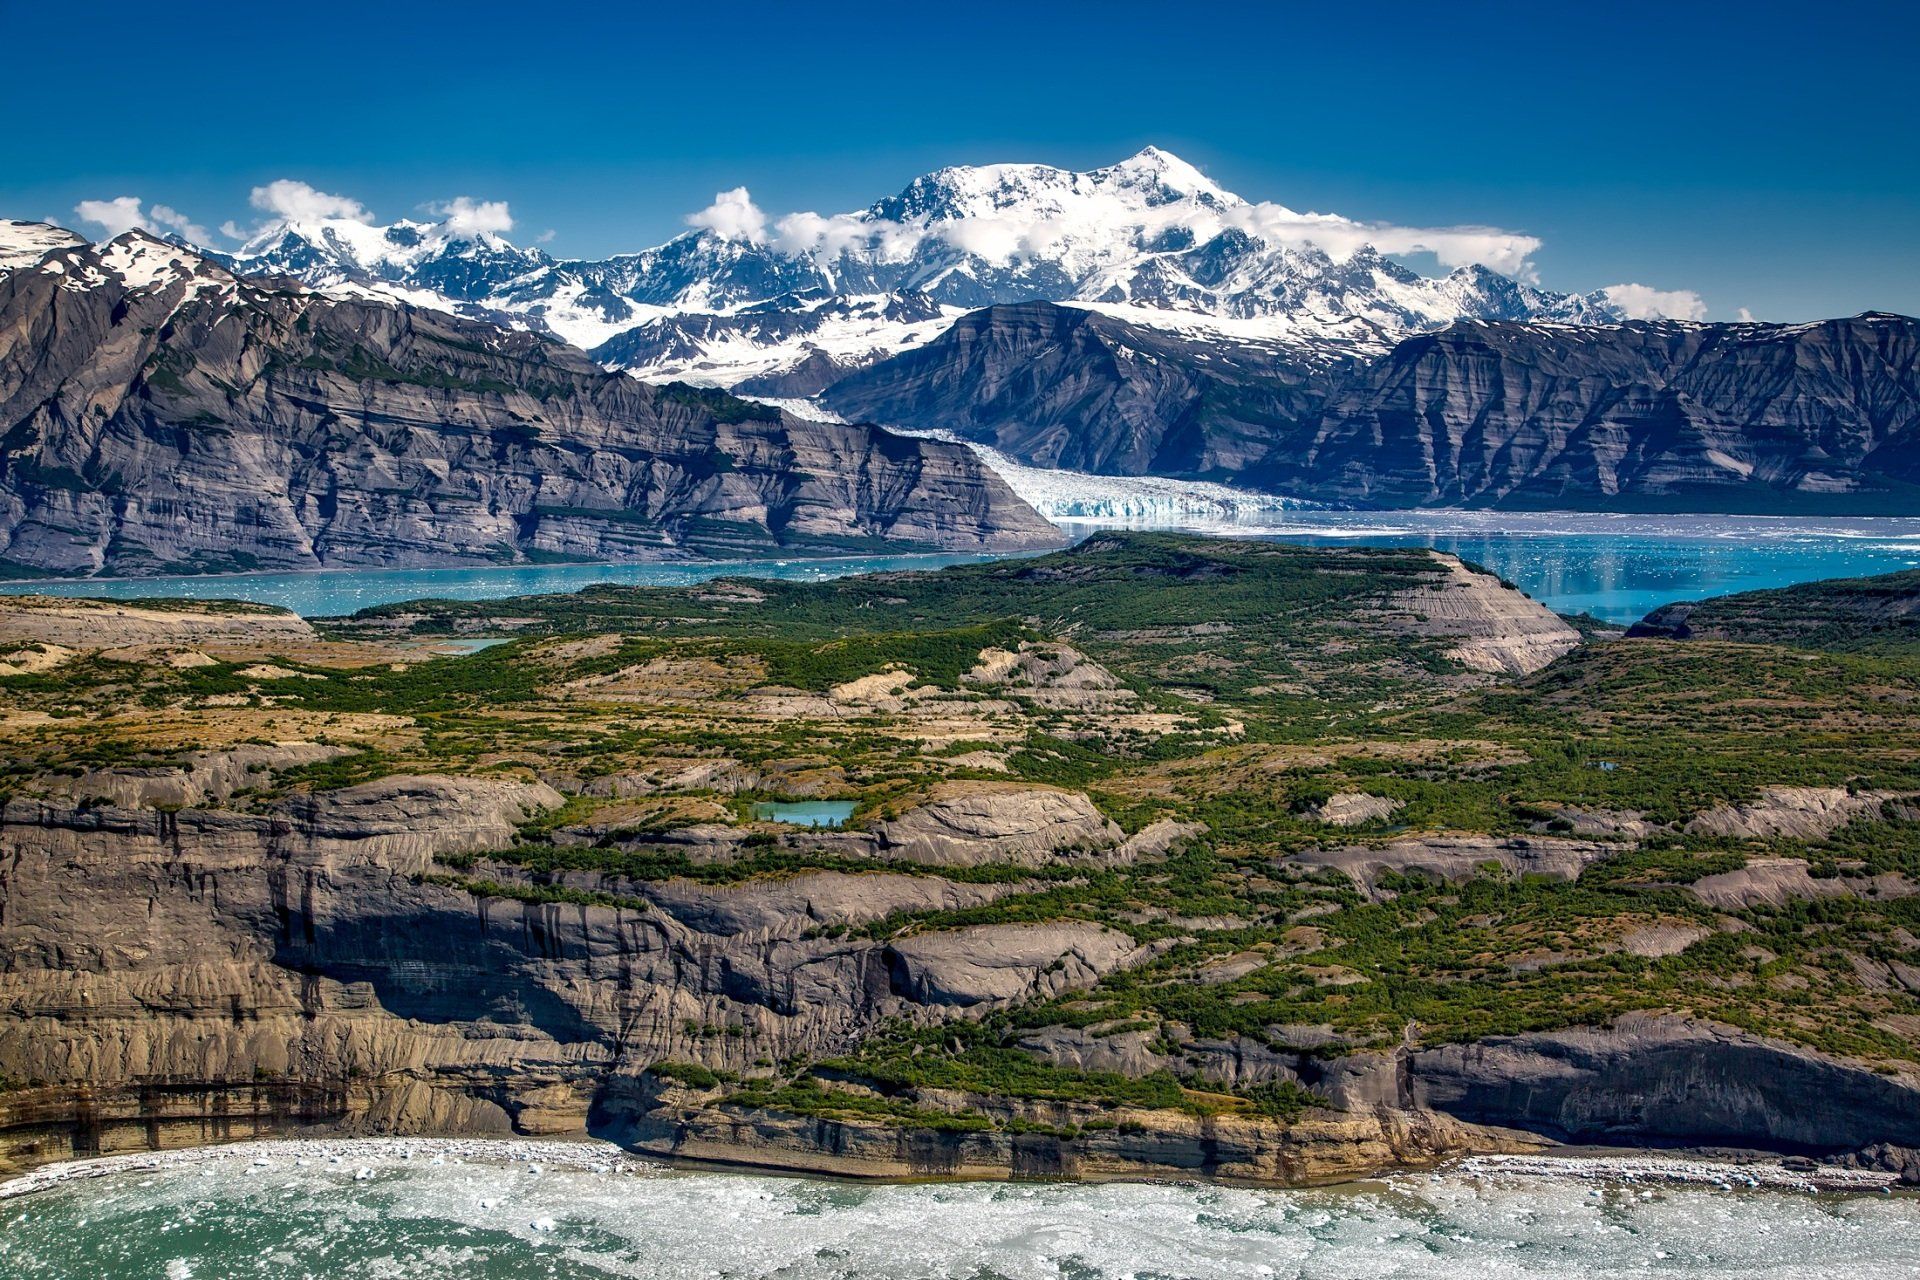 a landscape with mountains and a lake in the foreground and a glacier in the background .